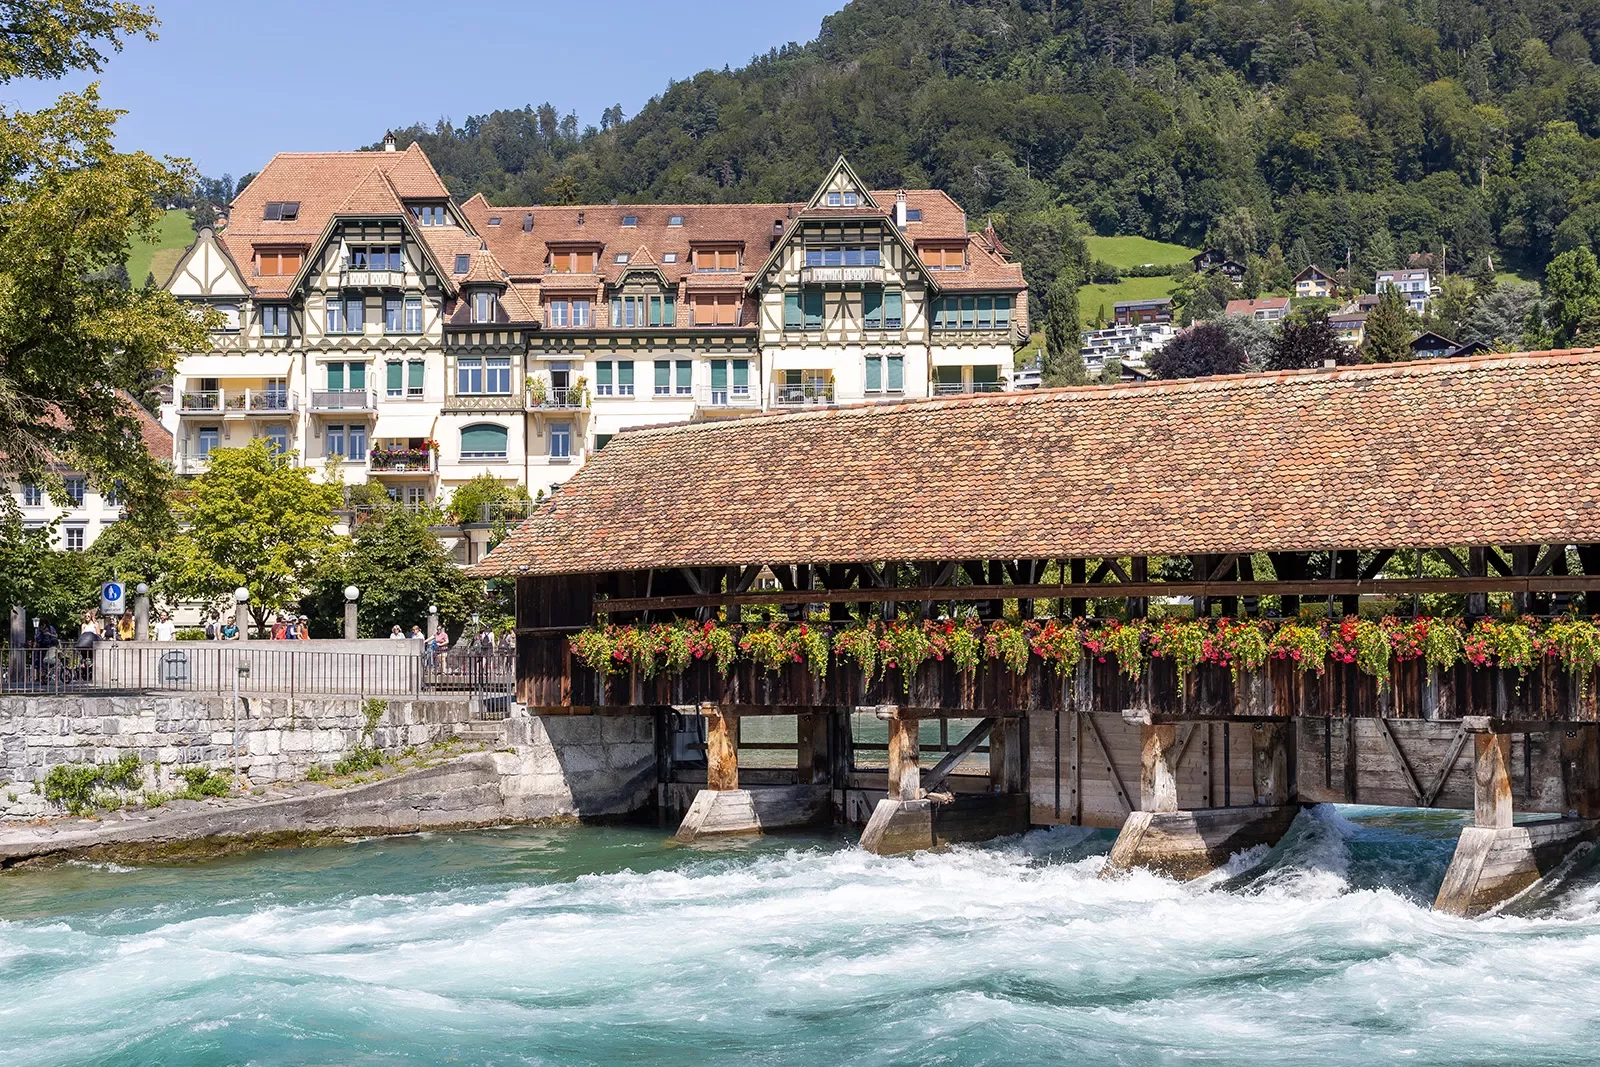 Bridge over the Aare River in Thun, Swiz. Large German style house in background.